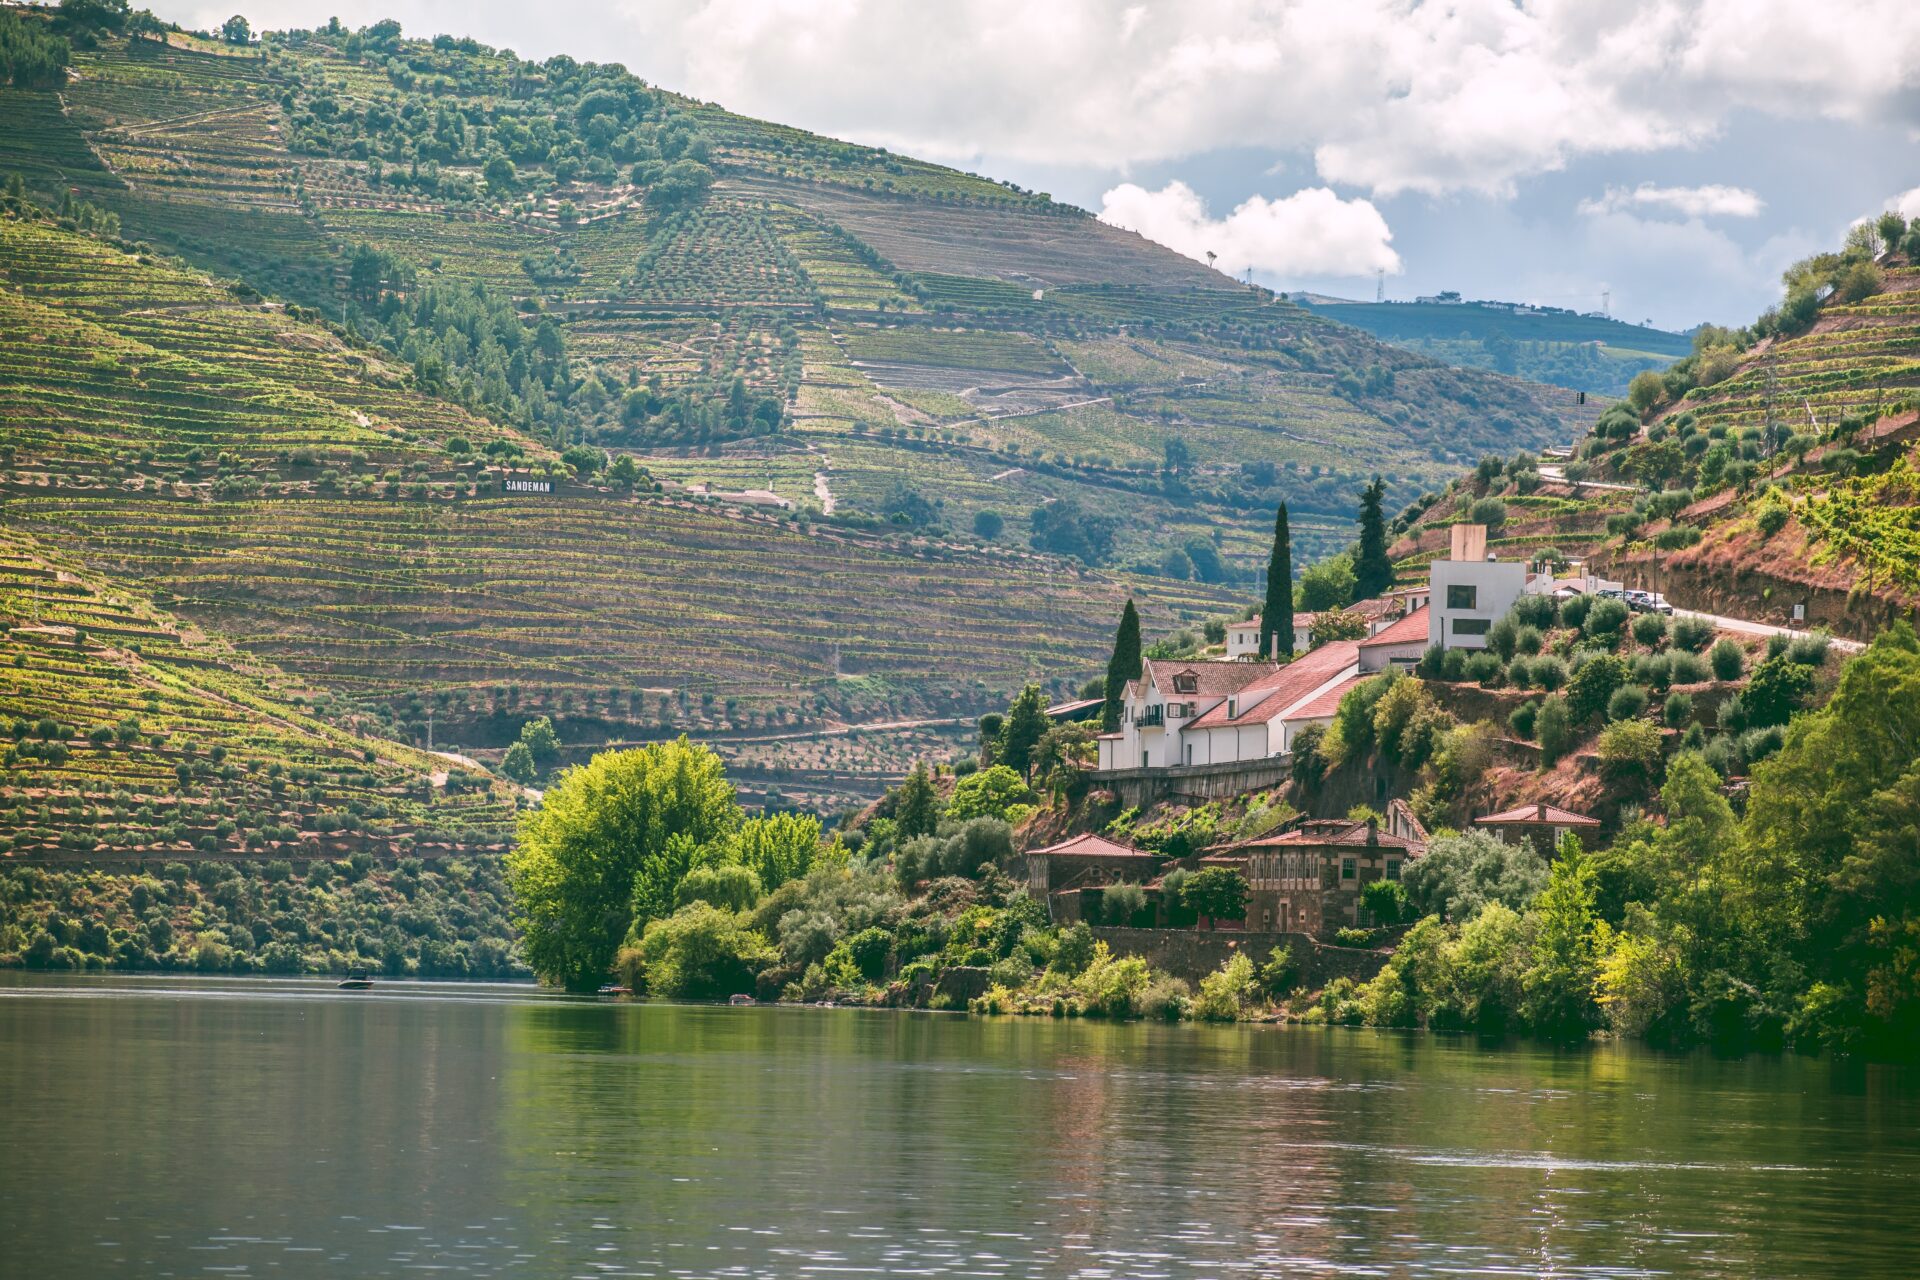 Douro valley in portugal